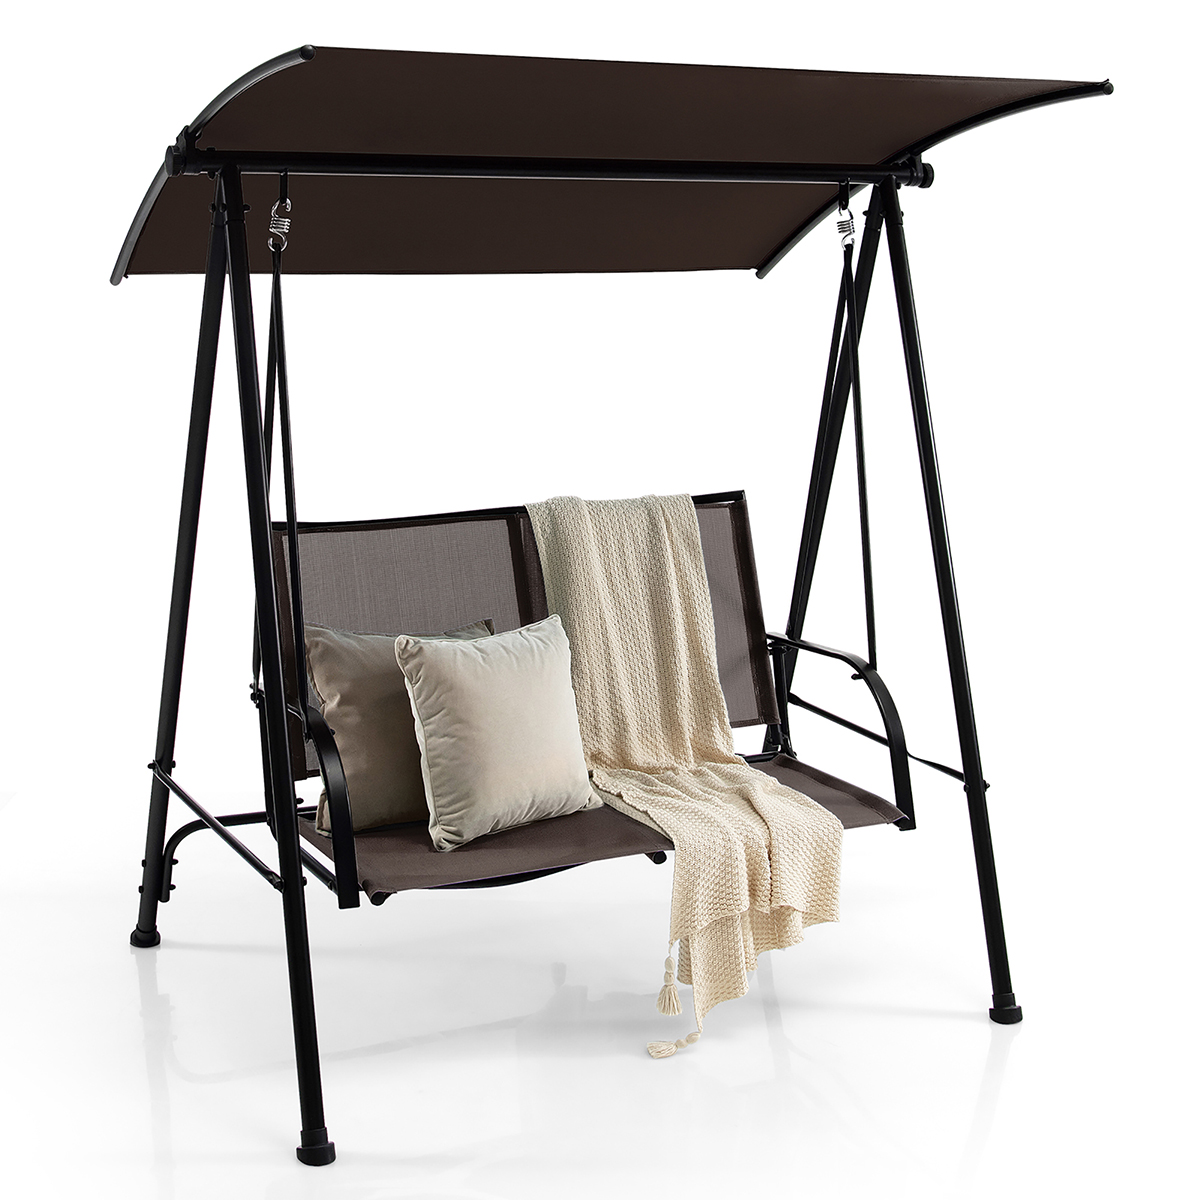 Photos - Canopy Swing Costway 2-Seat Patio Swing with Adjustable Canopy - Patio Swing Porch CF N 